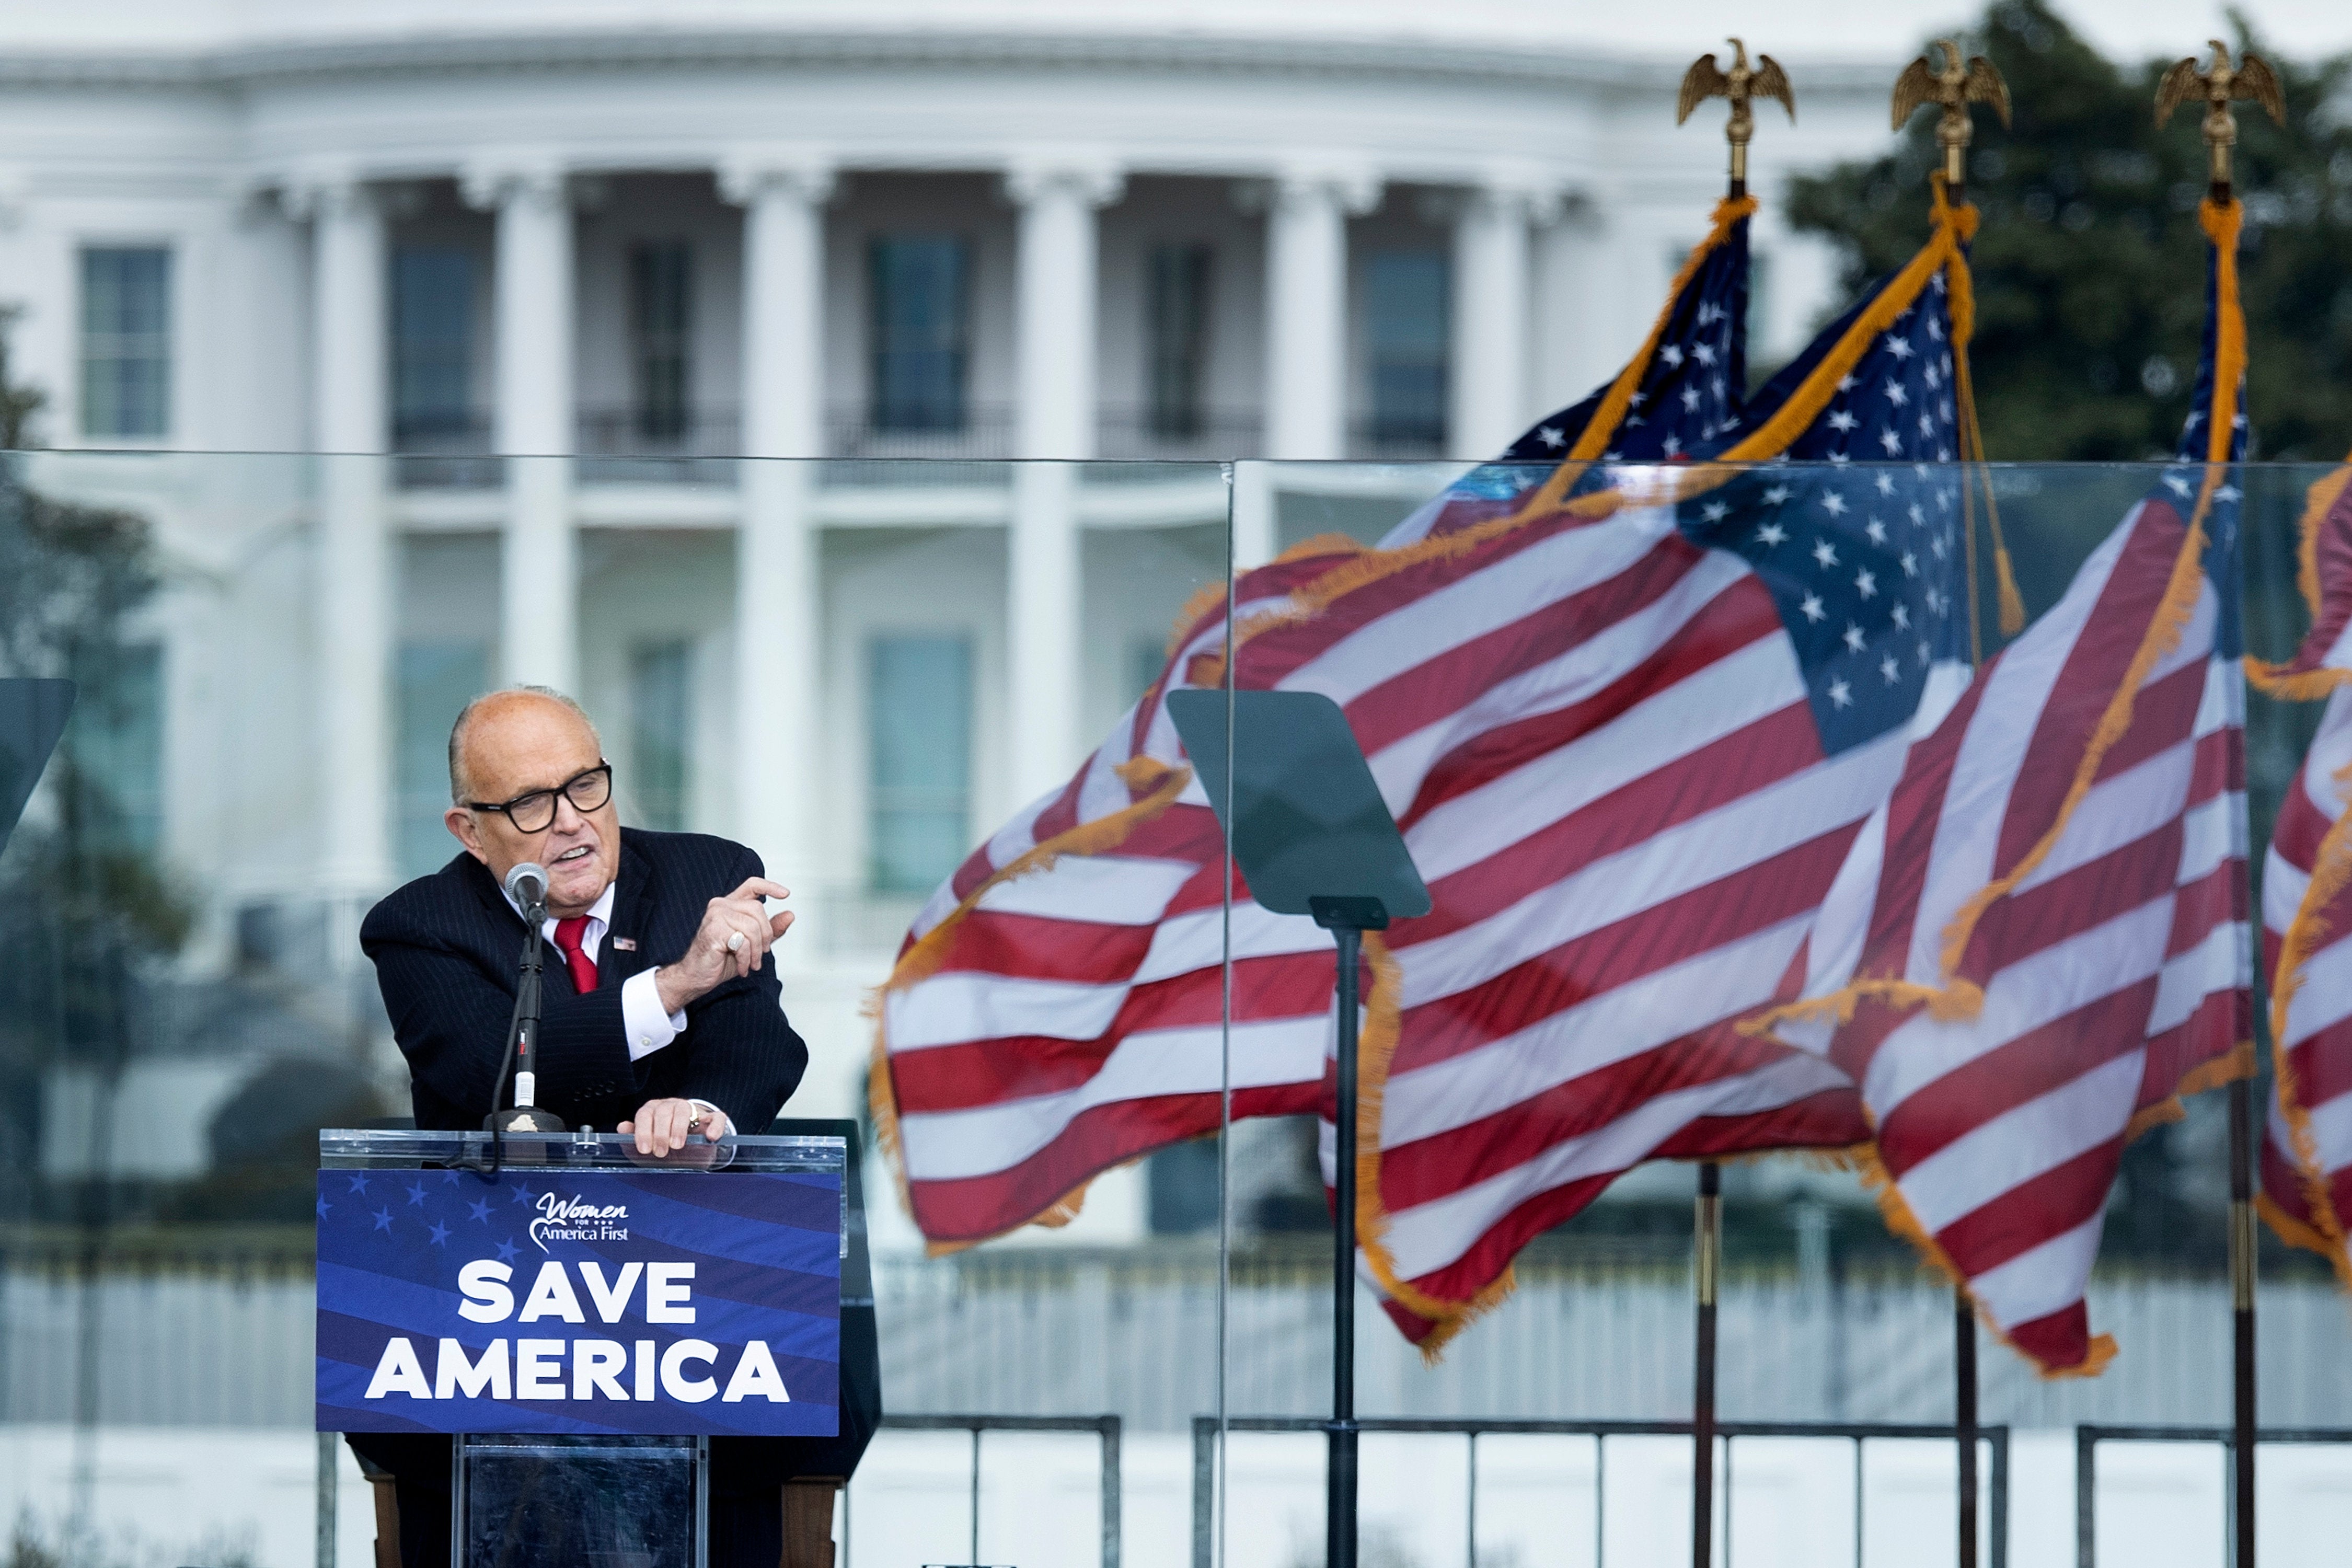 Rudy Giuliani speaks to supporters from The Ellipse near the White House on January 6, 2021, in Washington, DC.